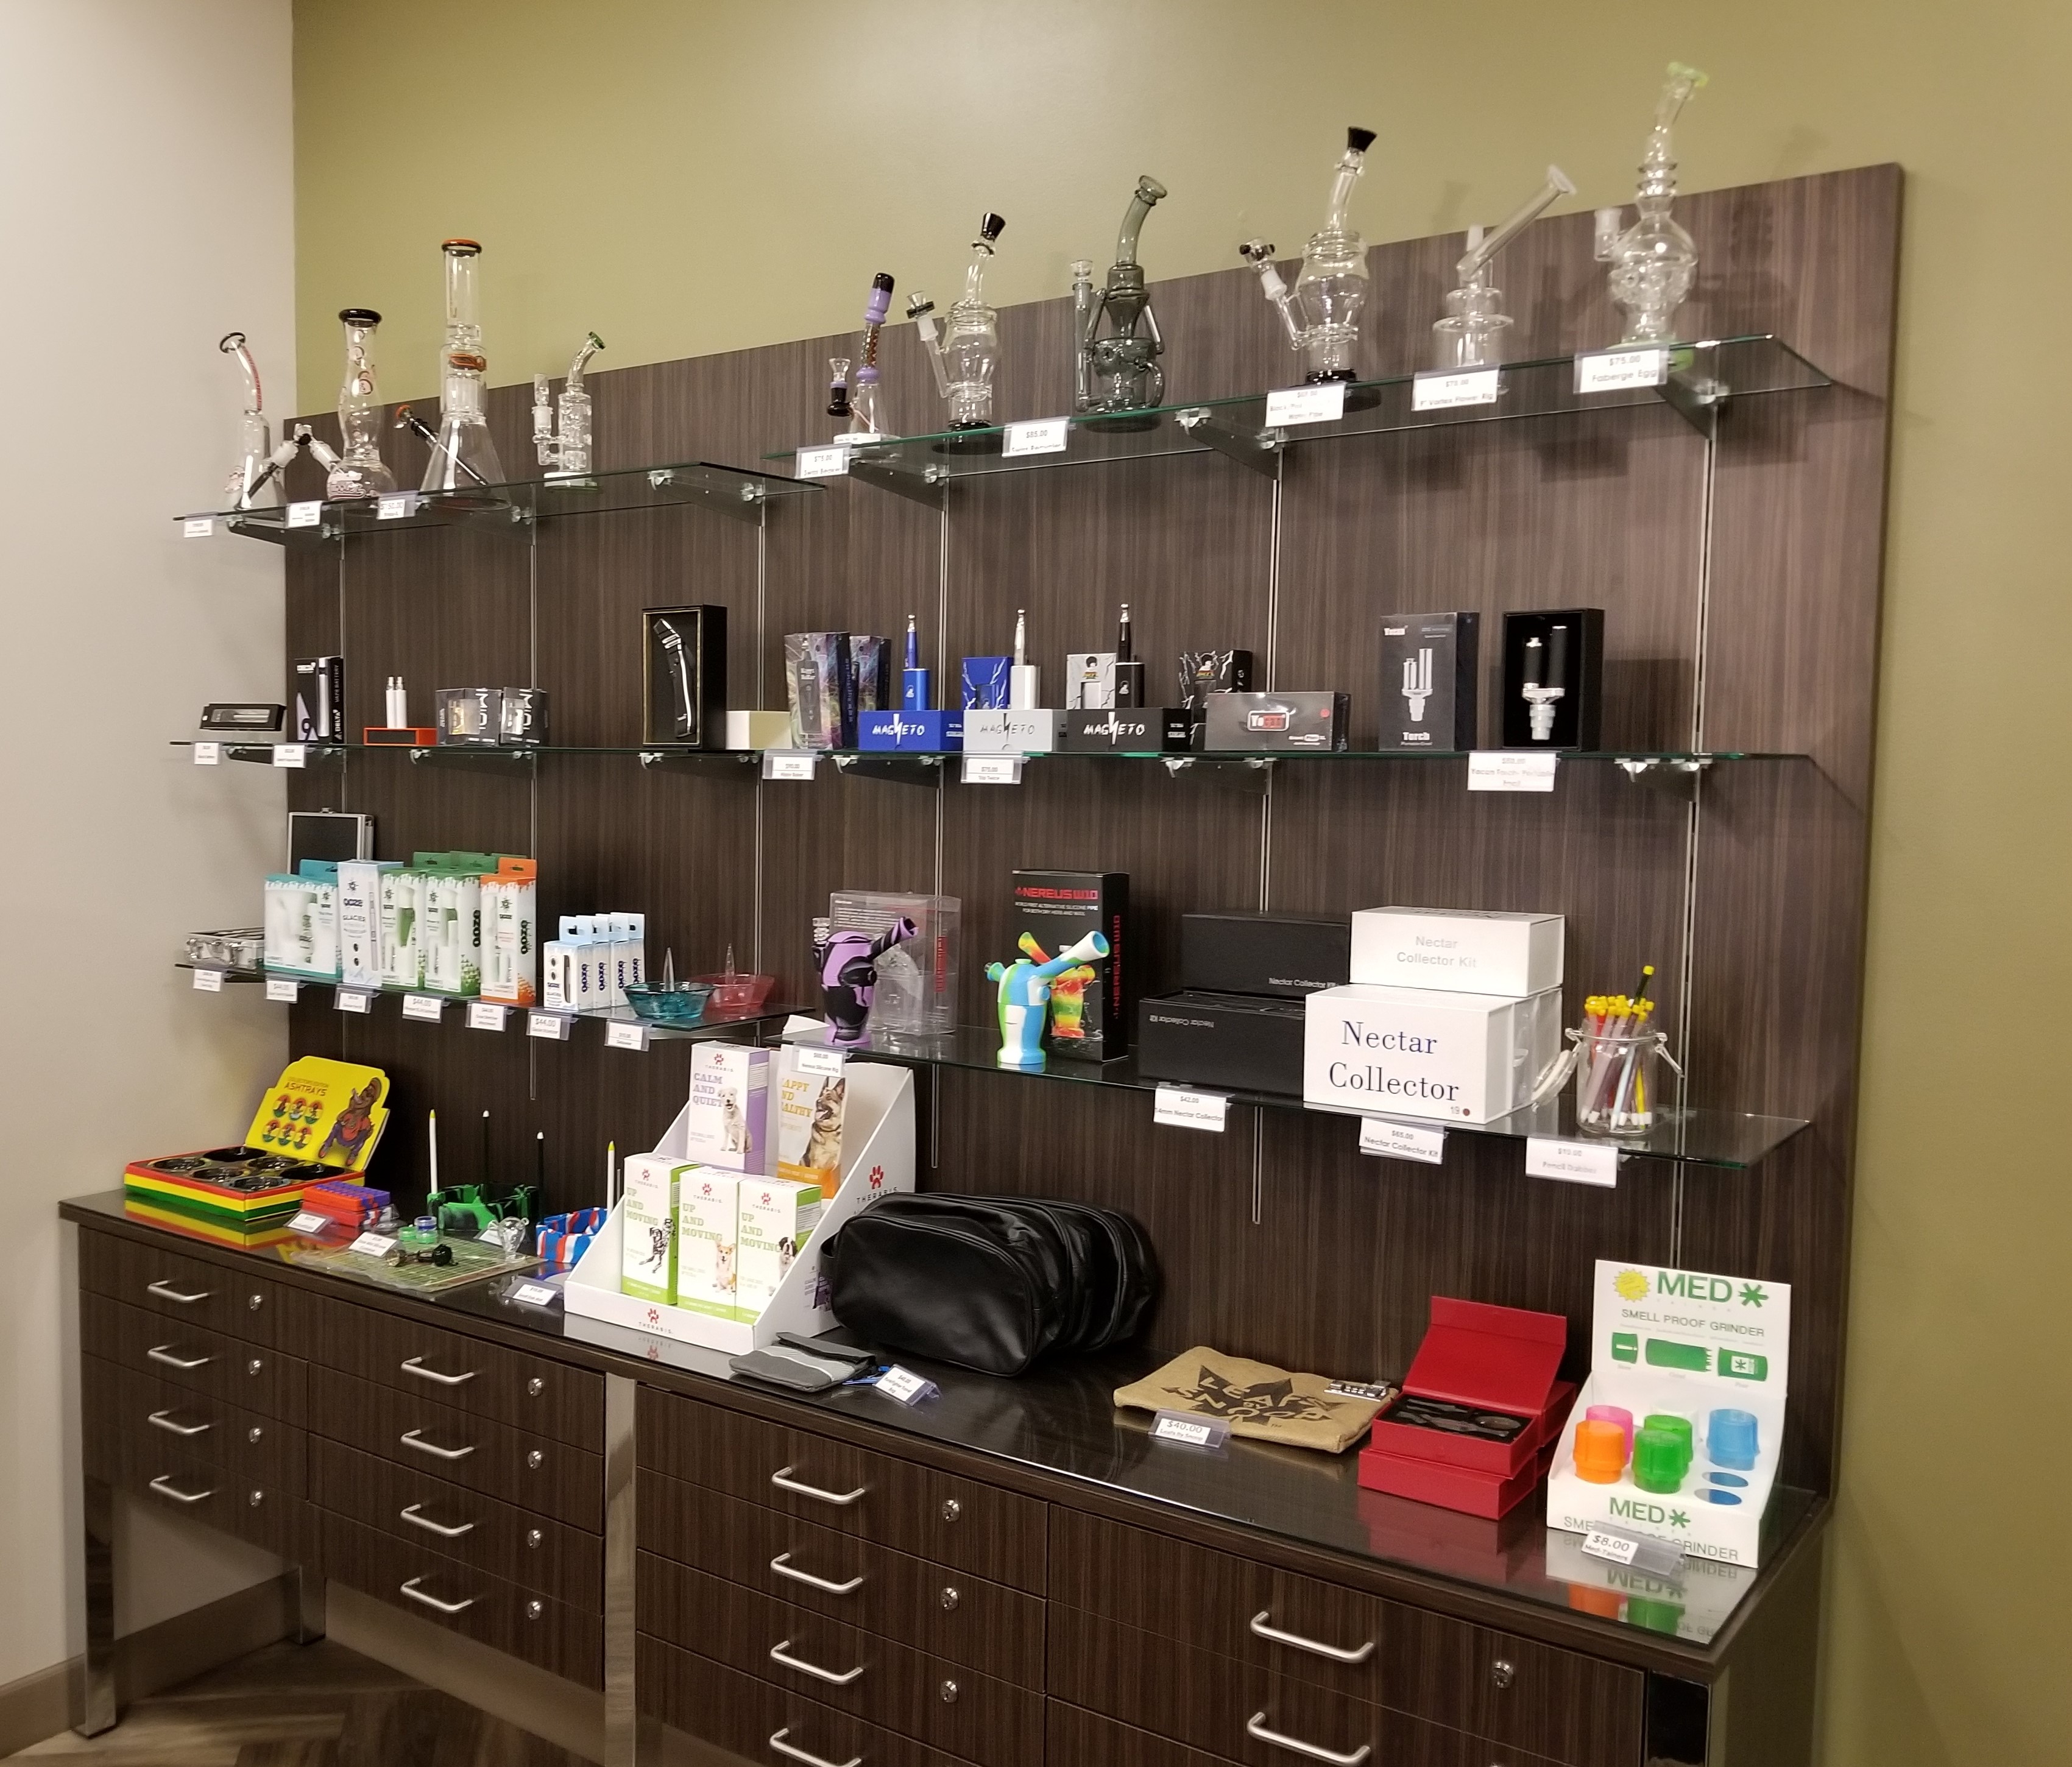 UFCW Local 152 Visits Adult Use Cannabis Dispensary - UFCW Local 152